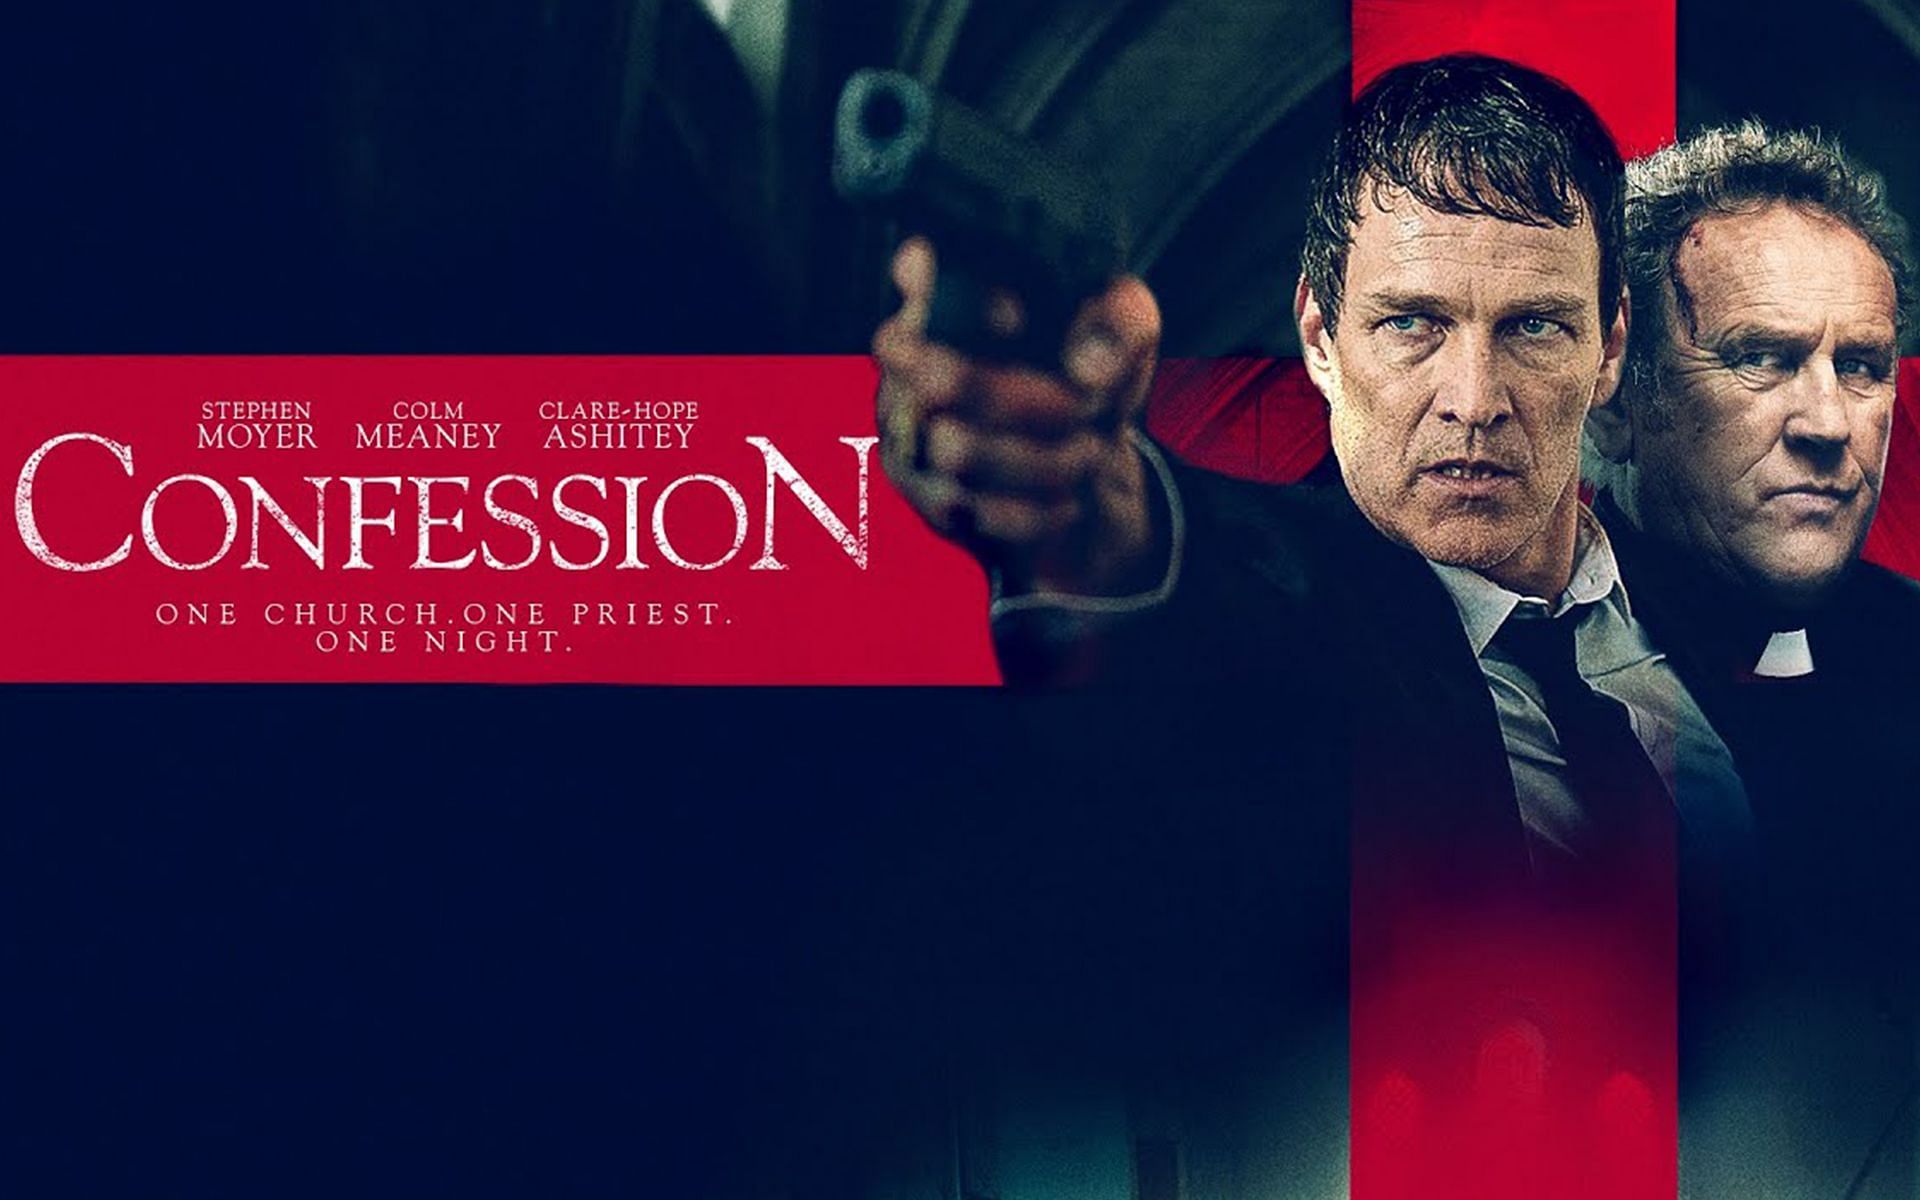 ‘Confession’ cast list Stephen Moyer, Colm Meaney and others star in